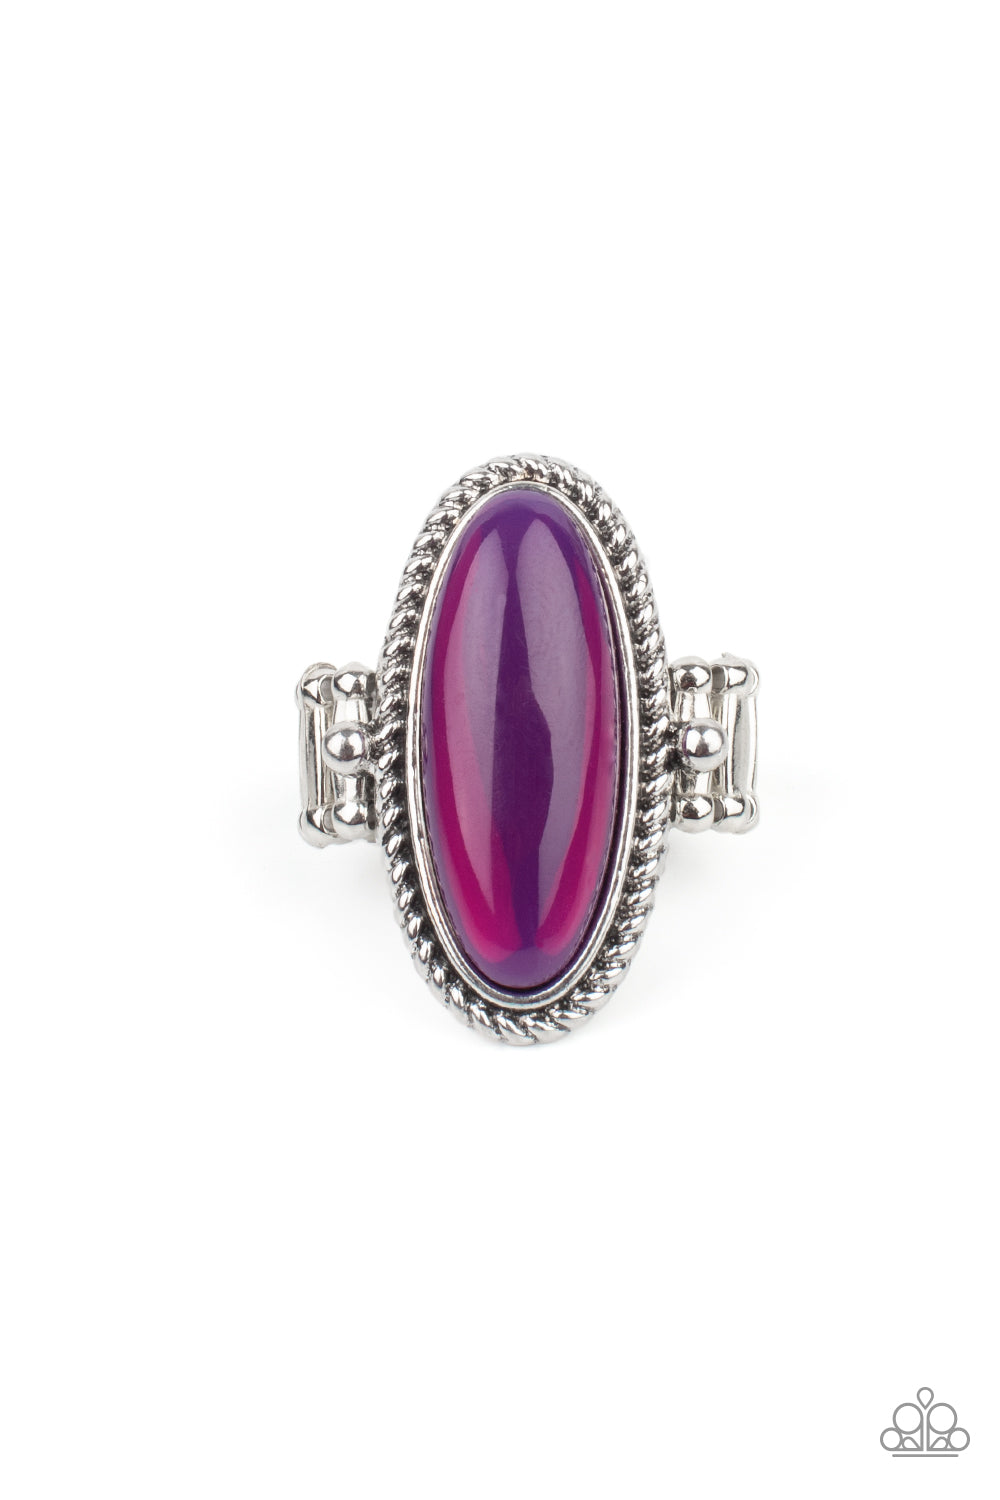 glassy iridescence, an oval purple acrylic bead is pressed into the center of textured silver fittings, creating a mystical centerpiece atop the finger